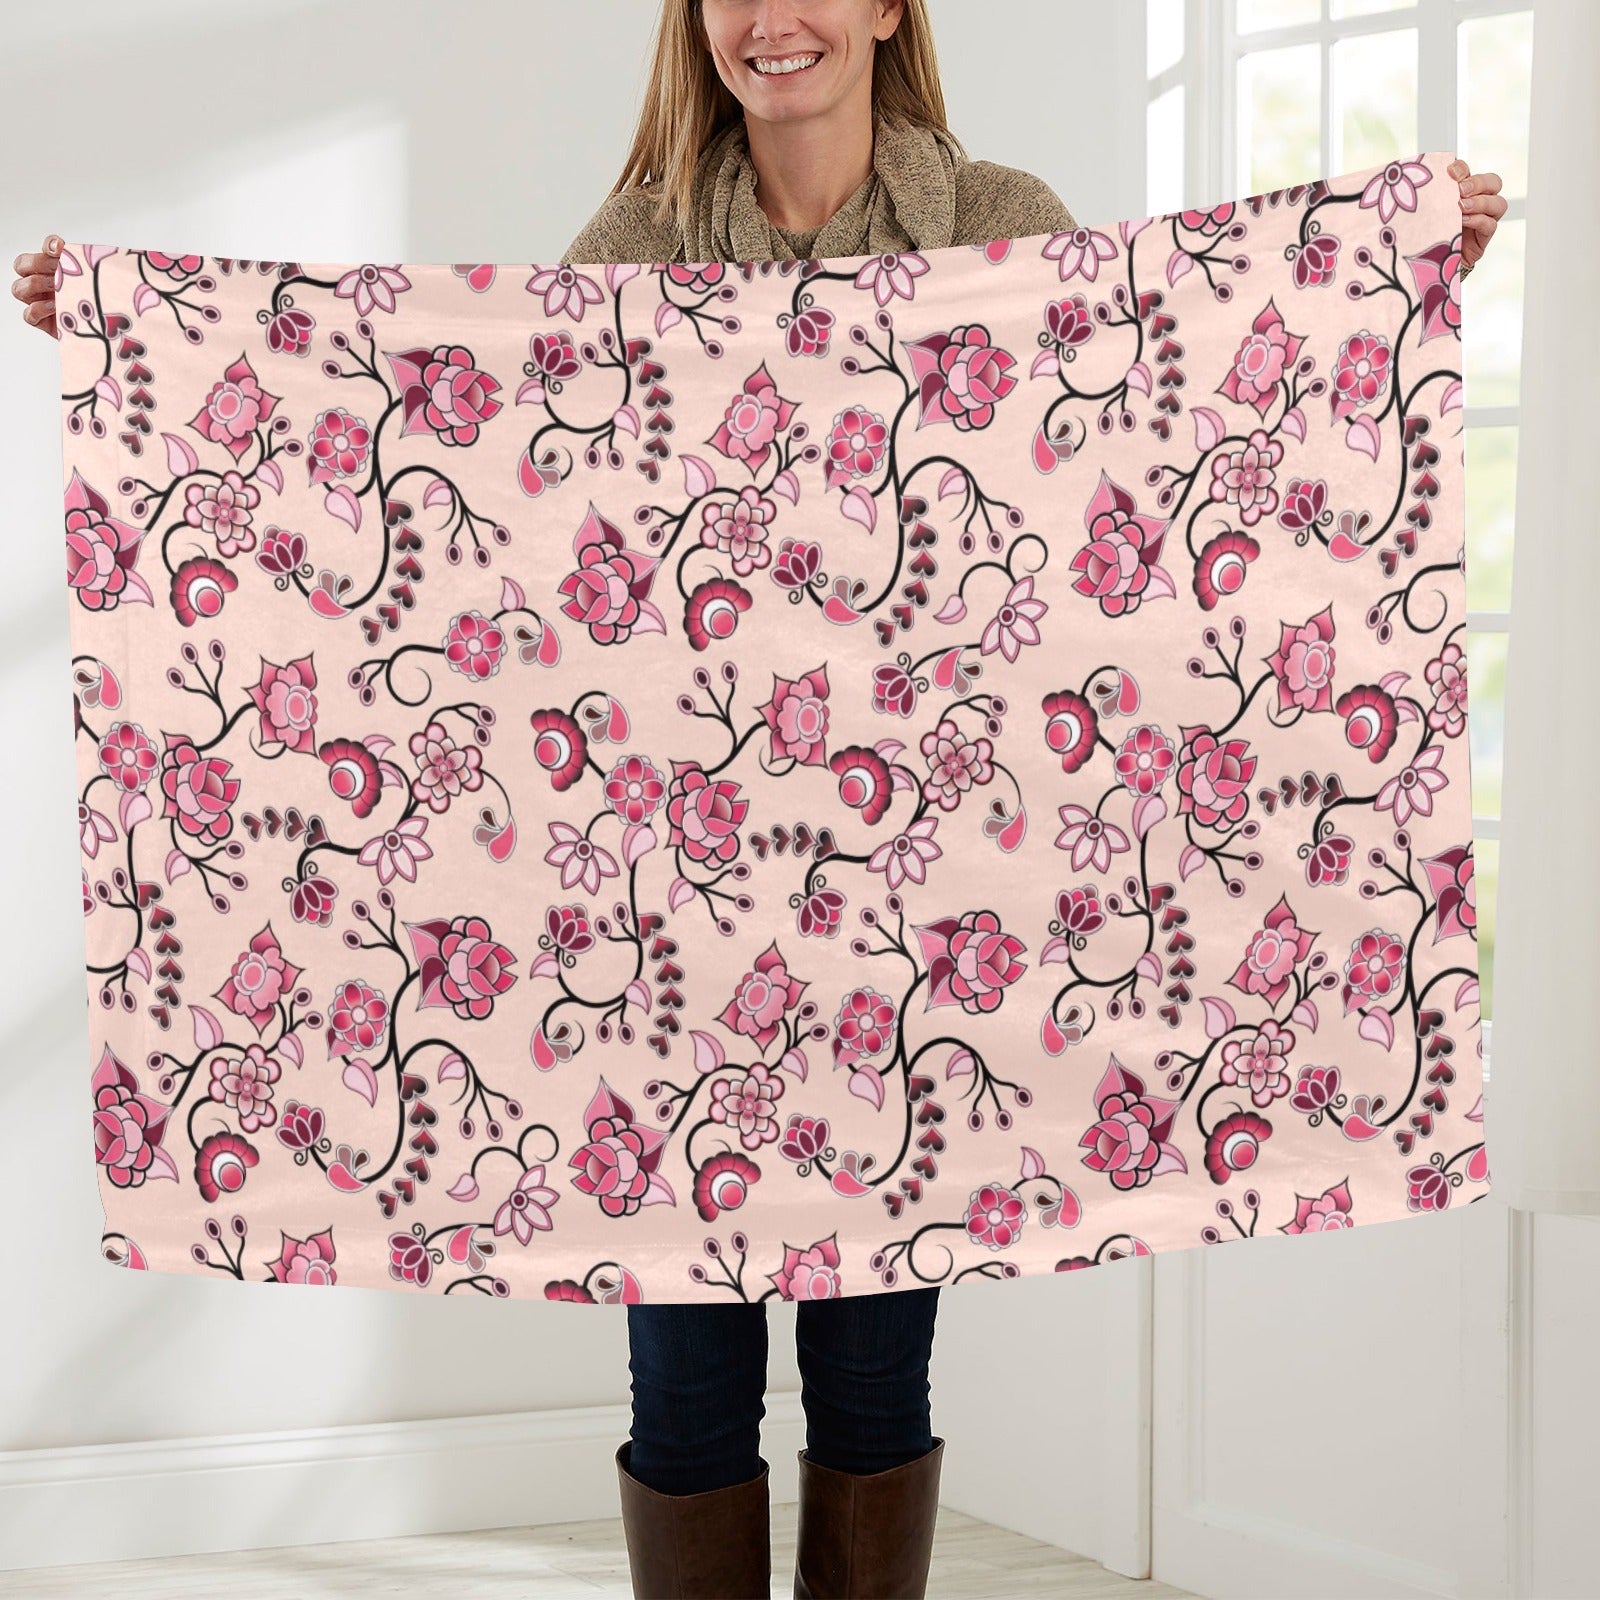 Floral Amour Baby Blanket 40"x50" Baby Blanket 40"x50" e-joyer 